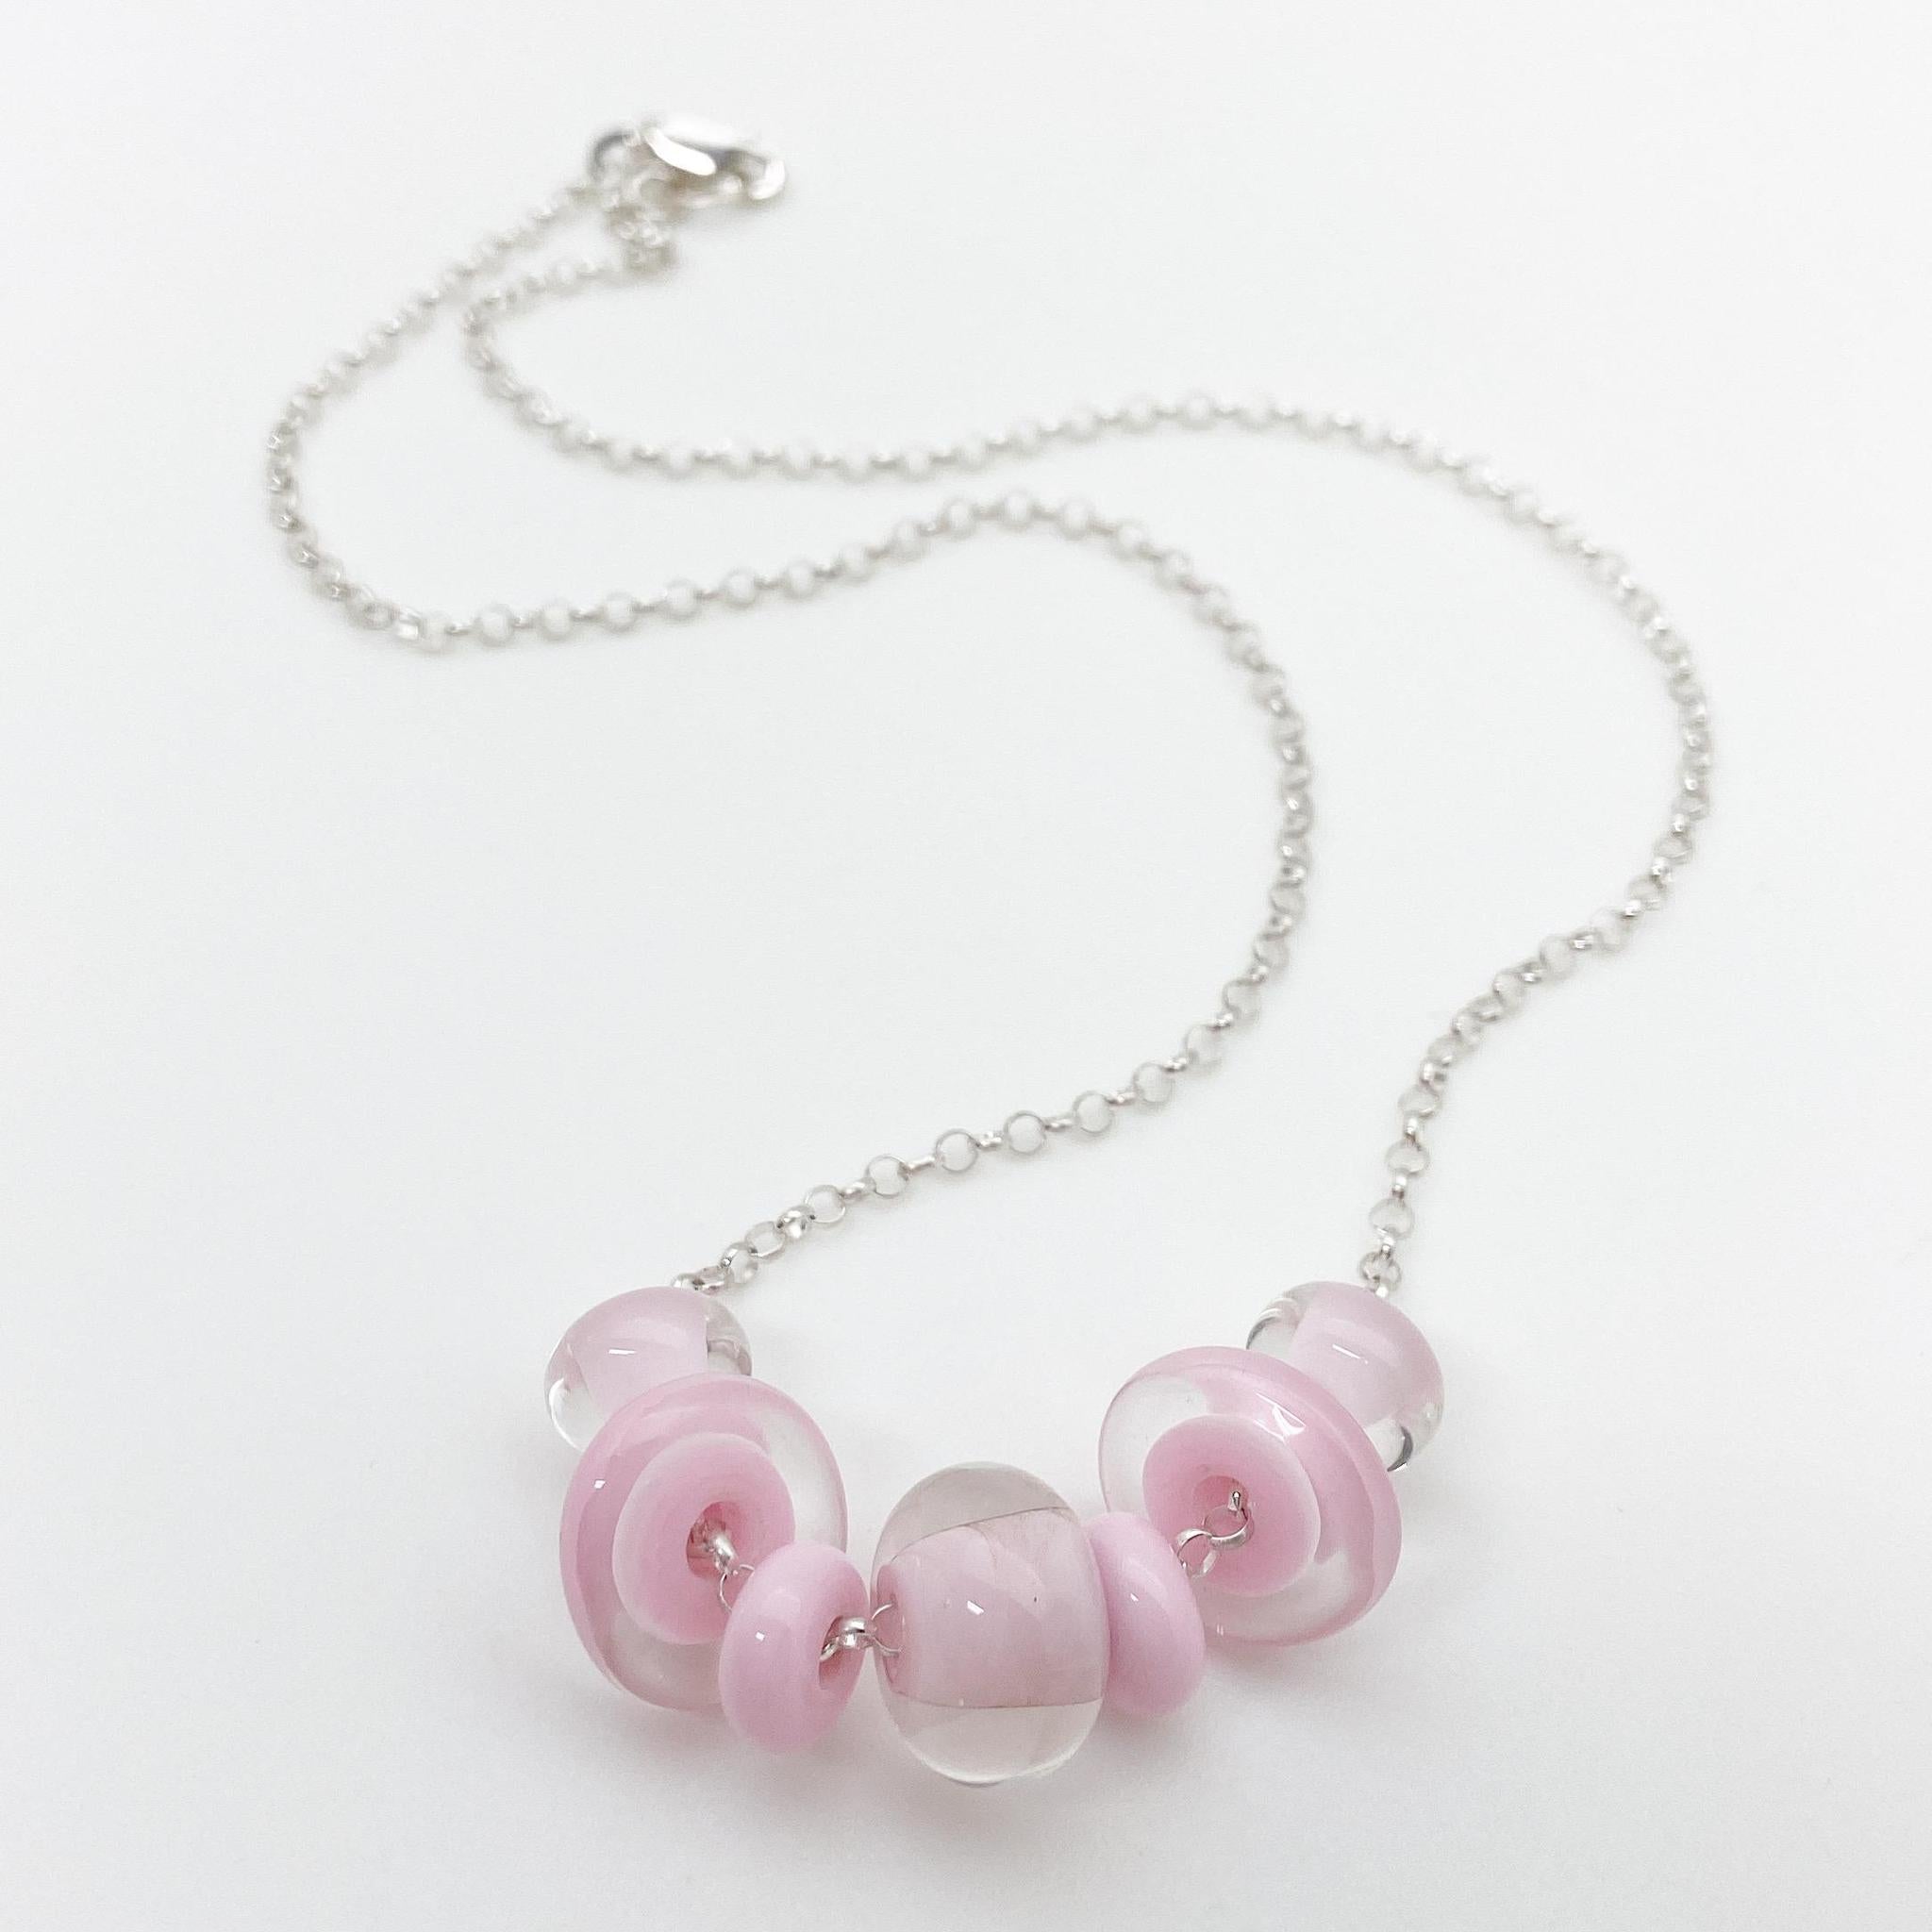 Necklace - Glass "Lifesaver" Beads - Pink